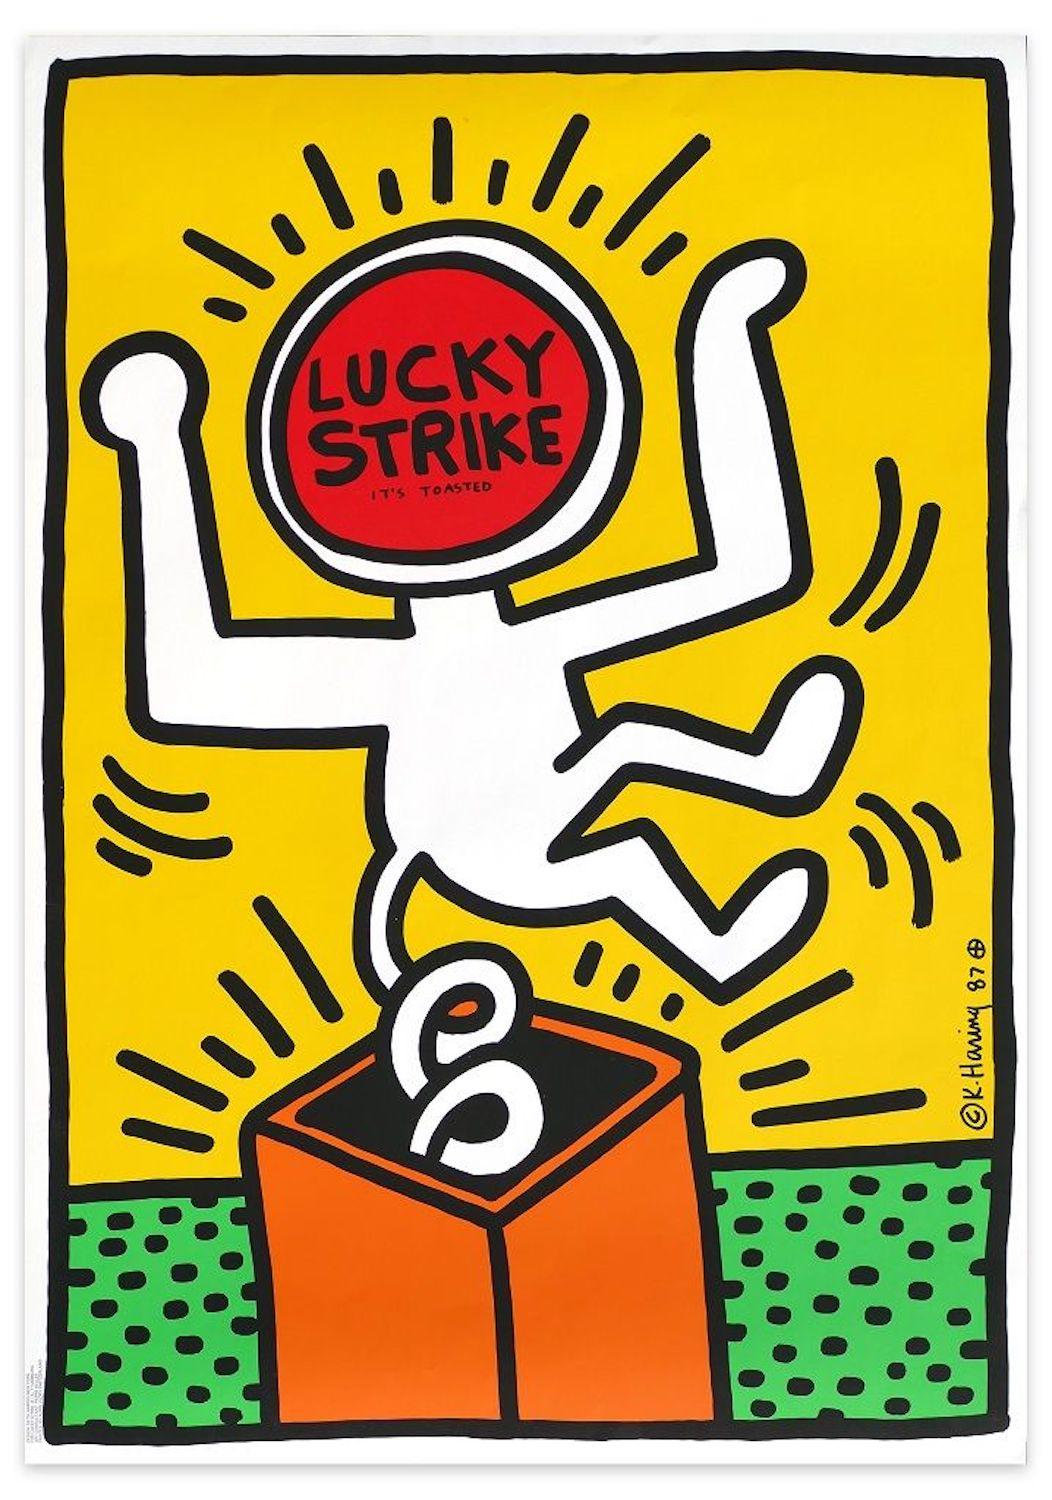 Lucky Strikes is a beautiful color serigraph on thin paper realized by the Pop Art master Keith Haring (Reading, 1958 - New York, 1990).

Signed and dated on the plate on the lower right margin. Printed by the serigrapher Uldry Berne, as the printed